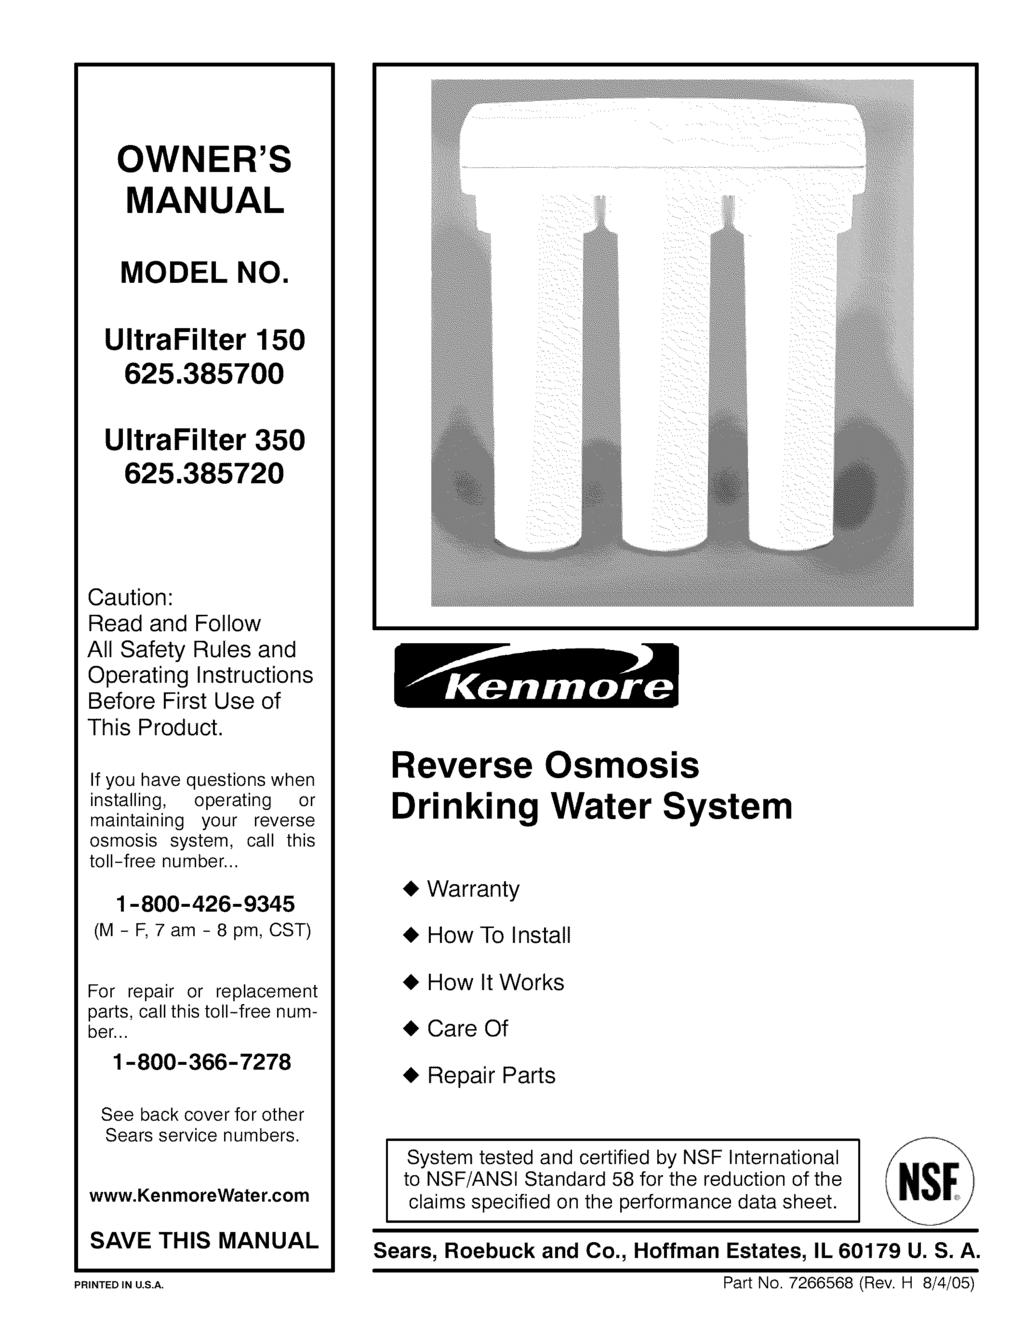 OWNER'S MANUAL MODEL NO. UltraFilter 150 625.385700 UltraFilter 350 625.385720 Caution: Read and Follow All Safety Rules and Operating Instructions Before First Use of This Product.